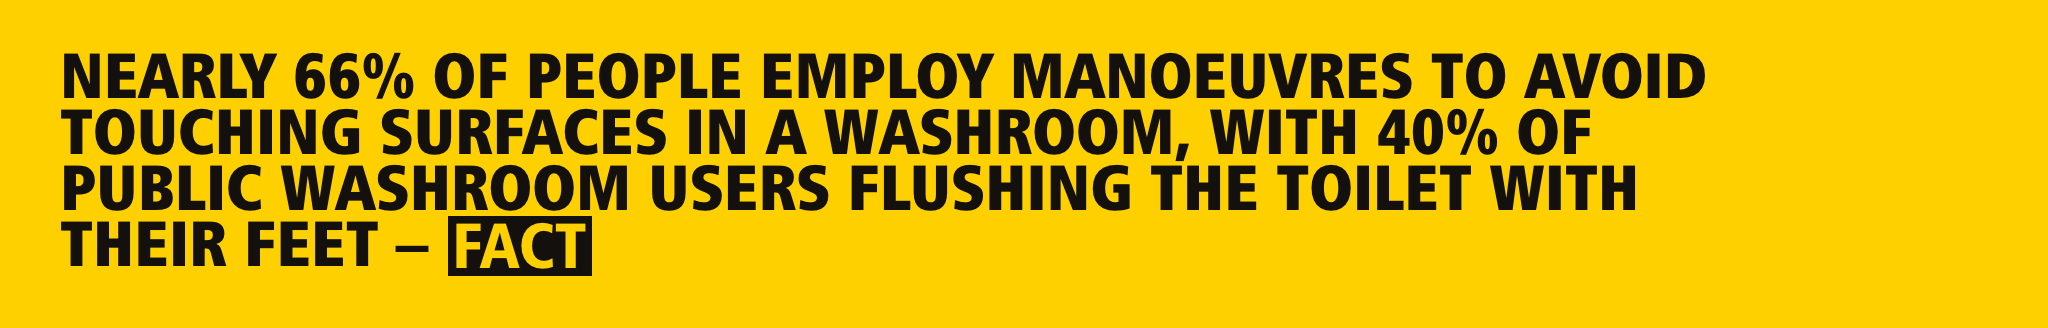 Nearly 66% of people employ manoeuvres to avoid touching surfaces in a washroom, with 40% of public washroom users flushing the toilet with their feet – FACT